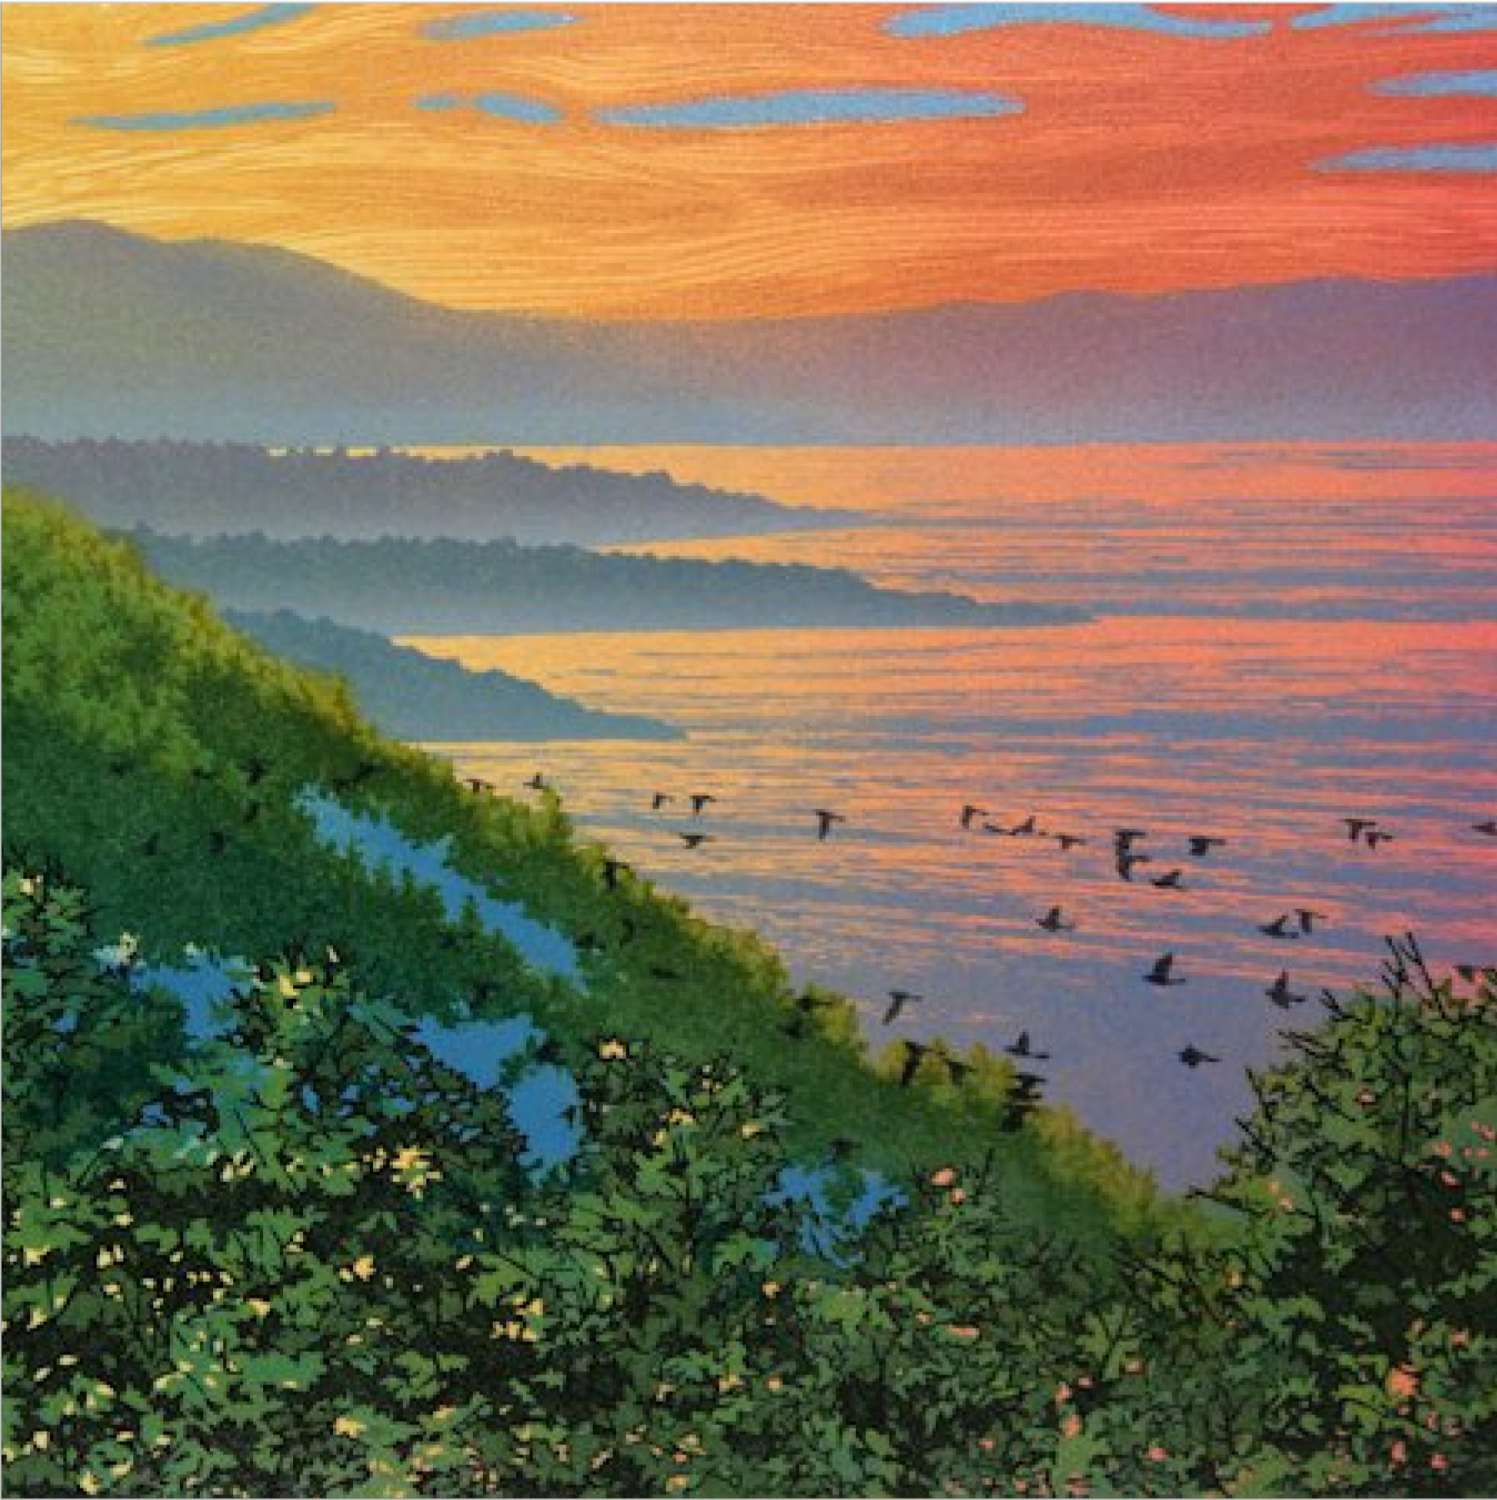 Painting of birds flying over the coast at sunset